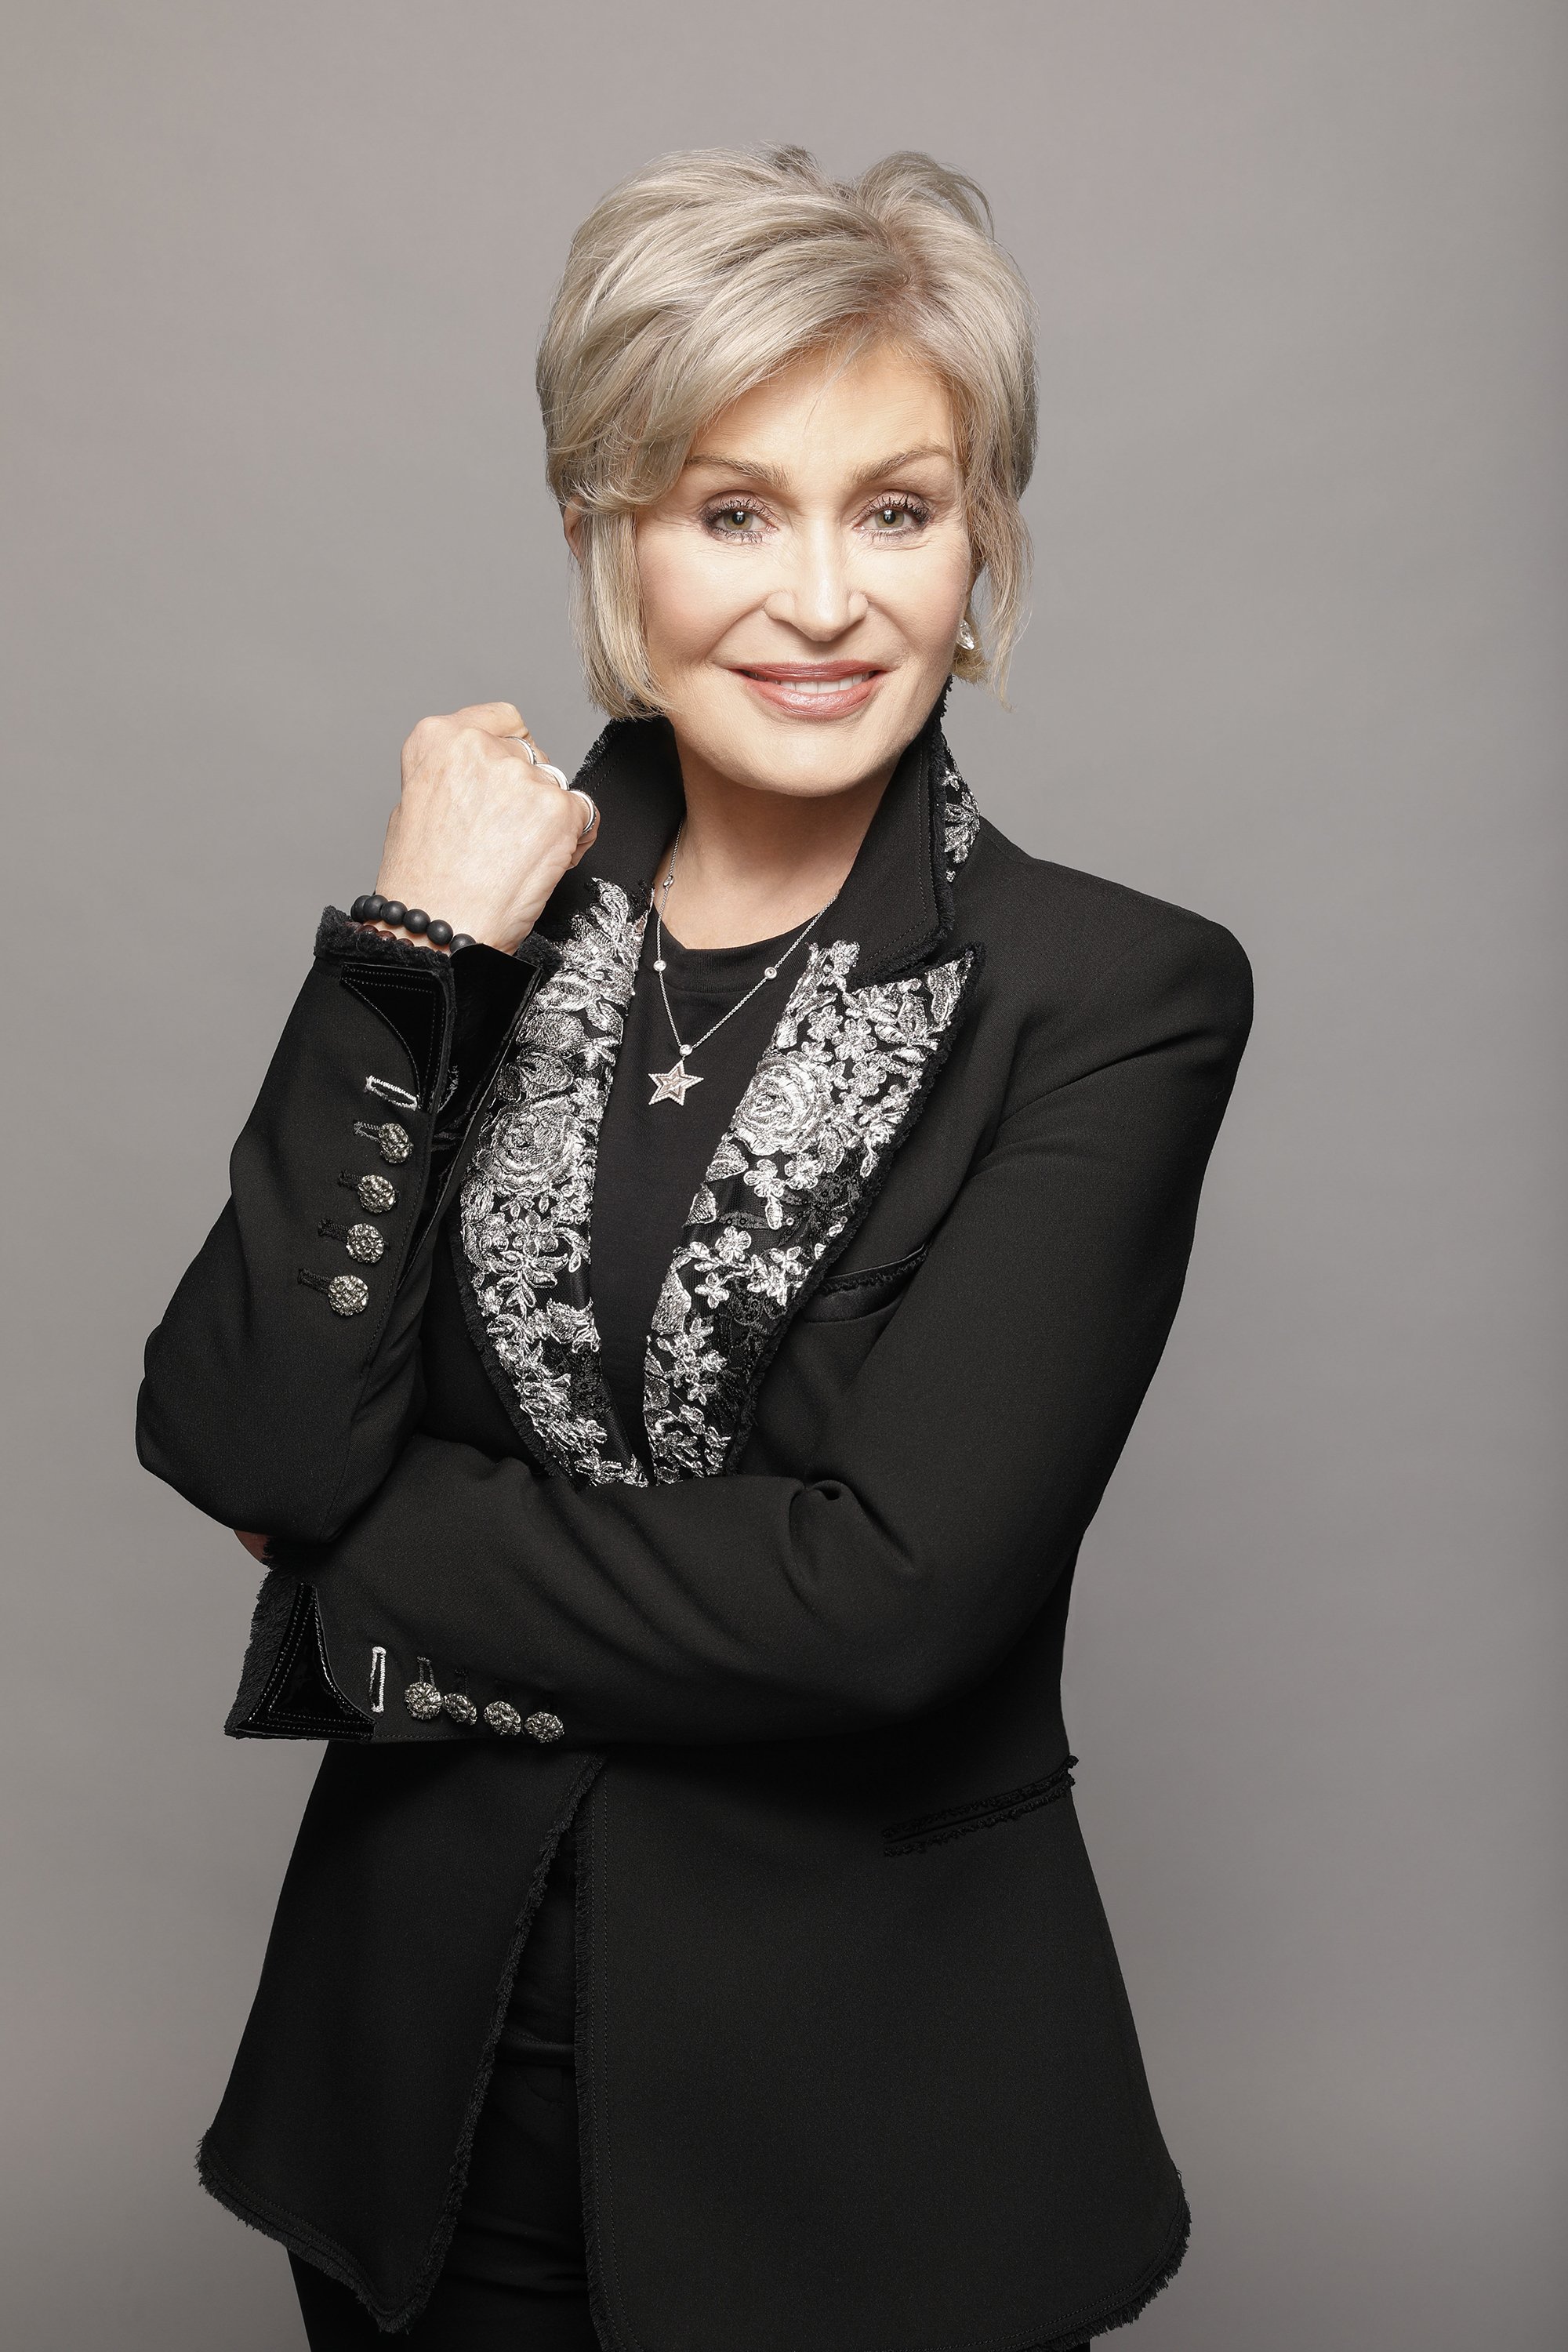 Studio portrait taken of Sharon Osbourne from "The Talk" in March 2020. | Source: Getty Images.